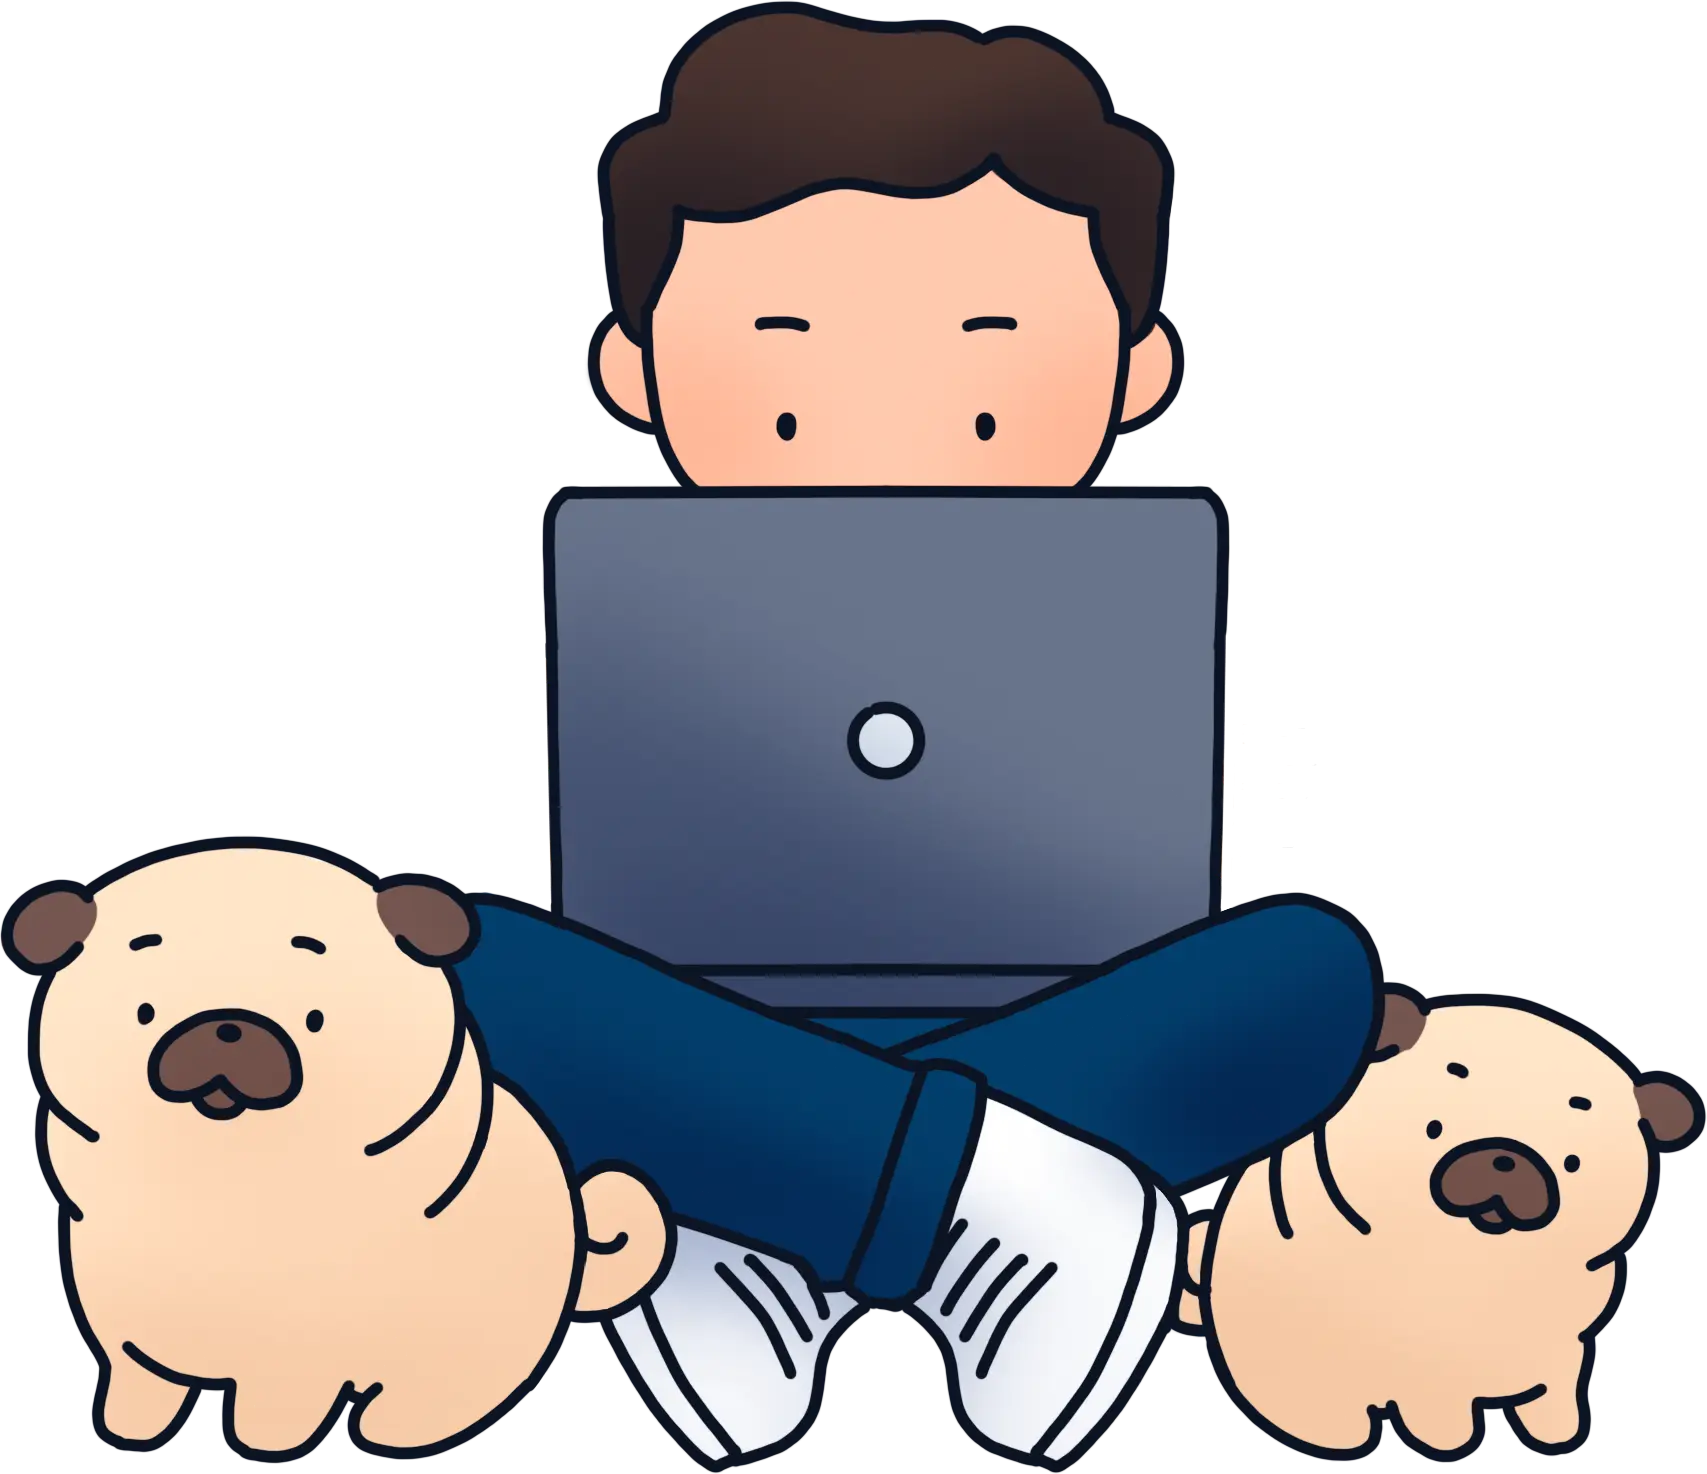 Chris and his pugs working on his laptop